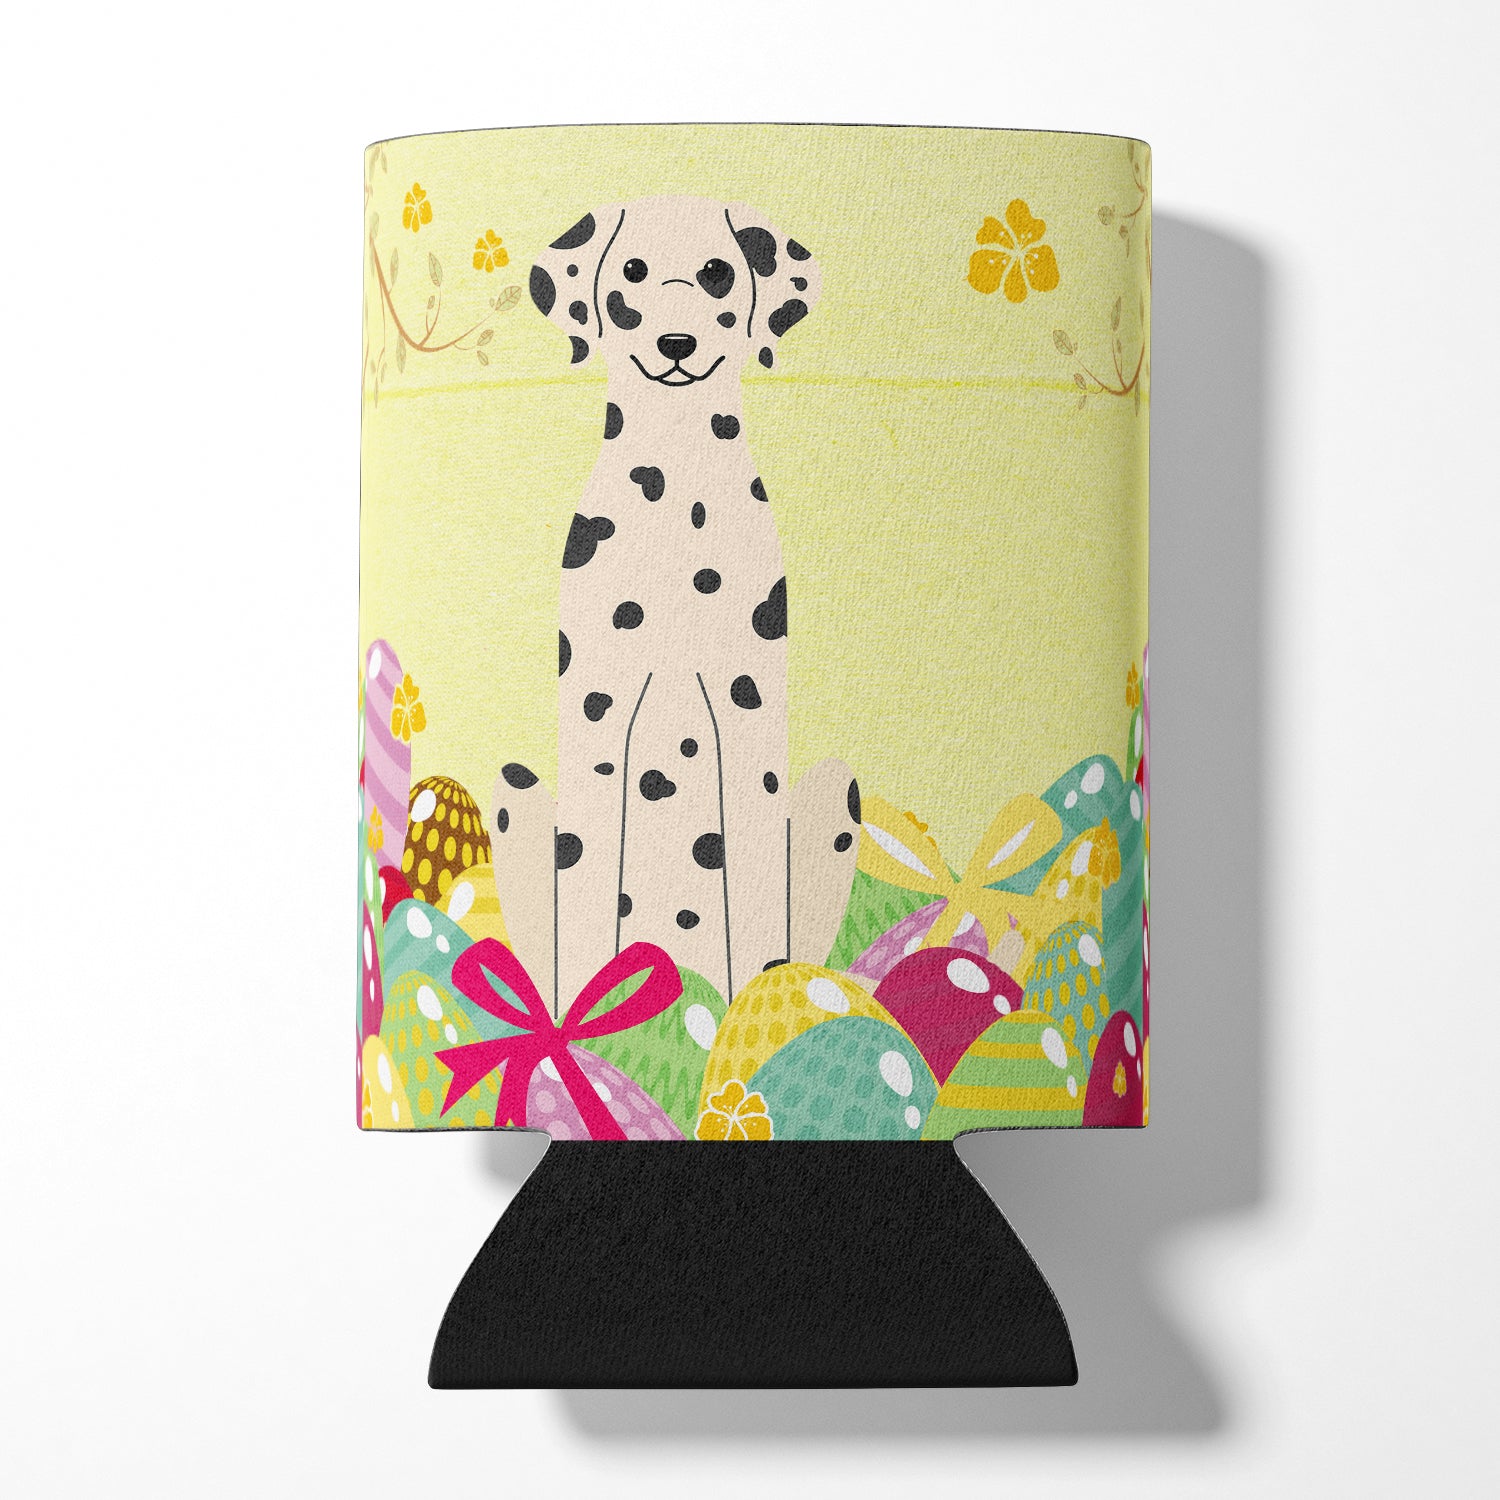 Easter Eggs Dalmatian Can or Bottle Hugger BB6097CC  the-store.com.